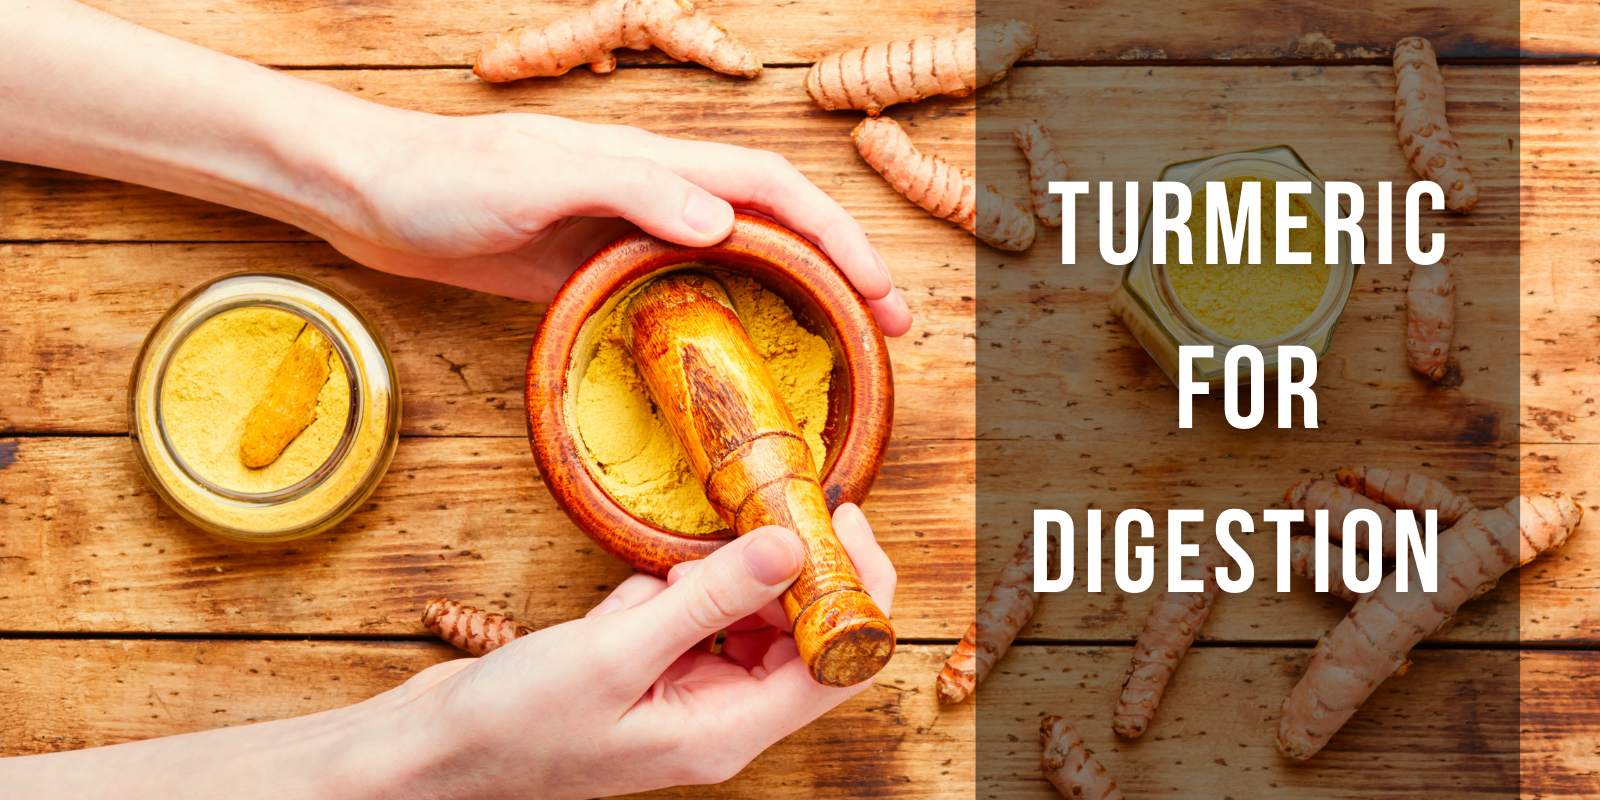 Turmeric for digestion